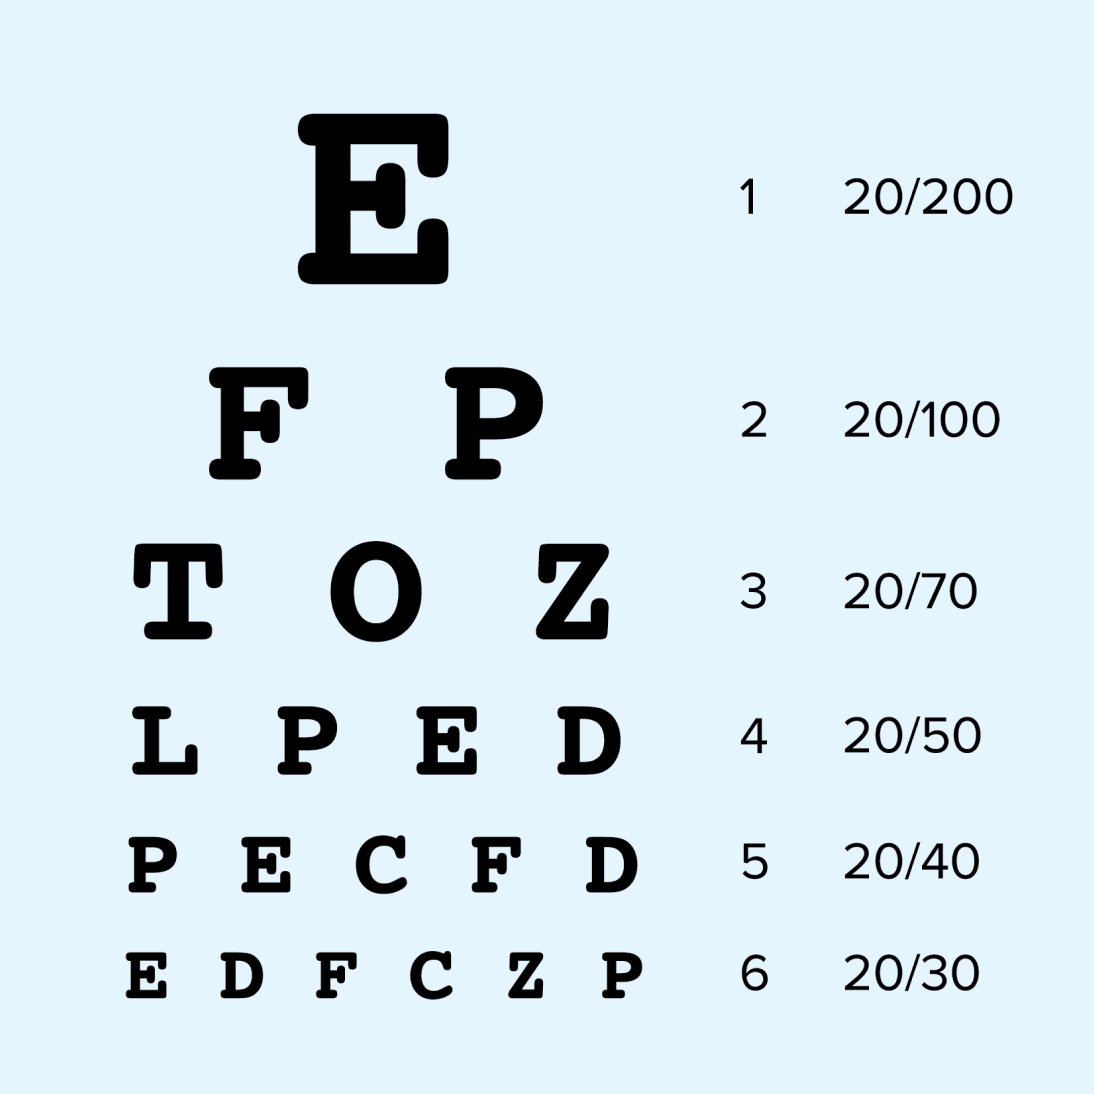 a person with 20/40 visual acuity?